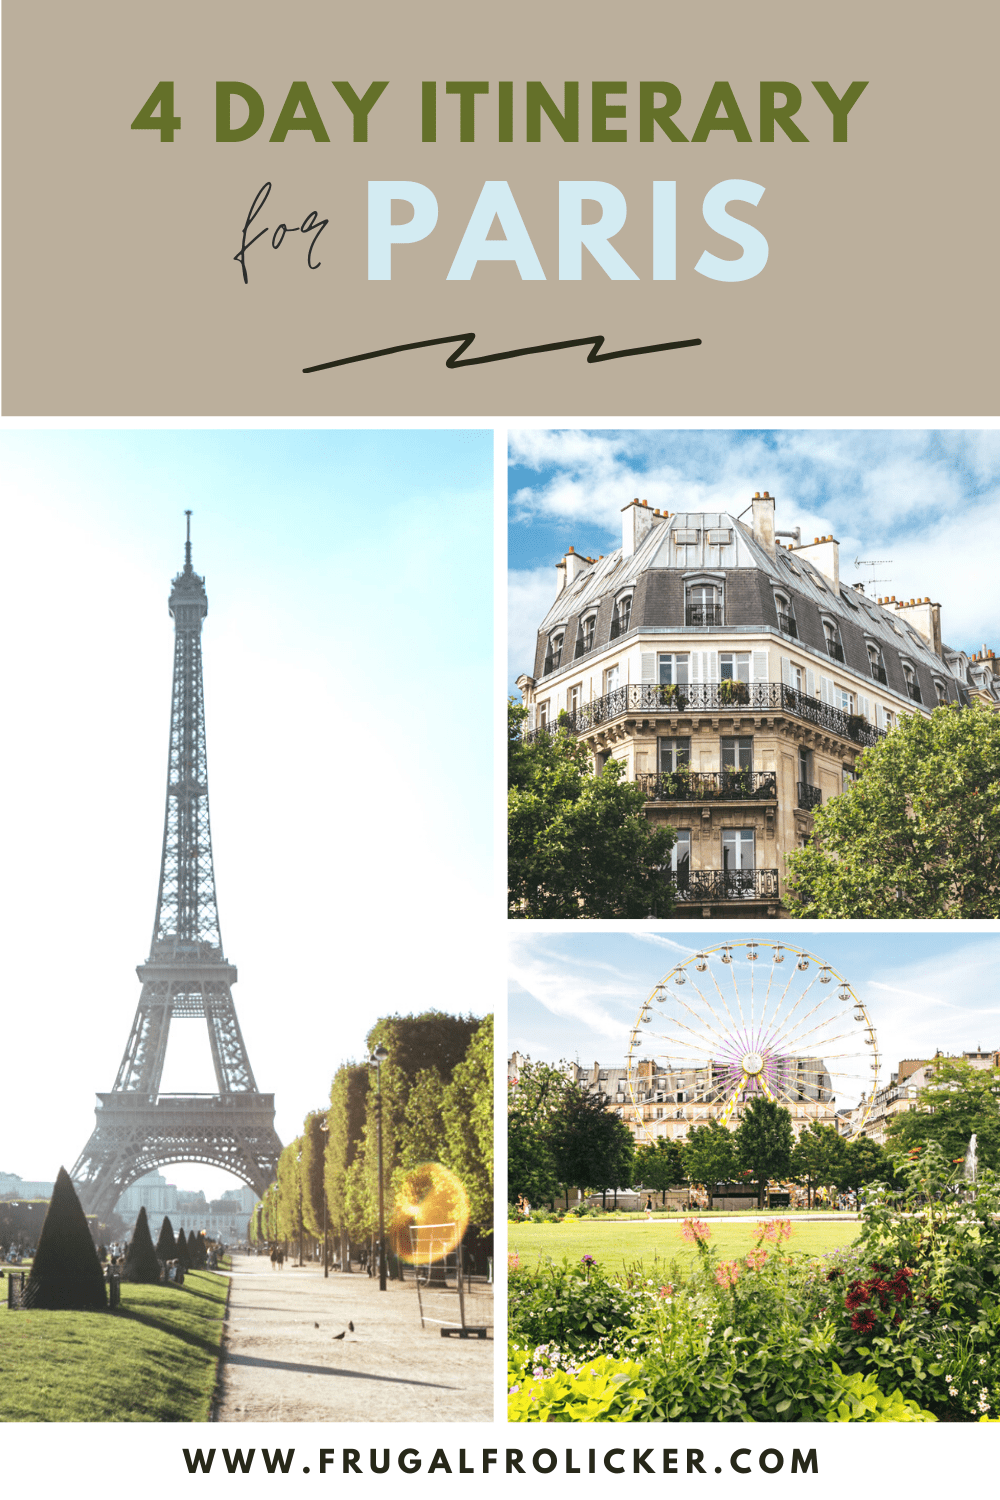 What To Do in Paris For 4 Days: A 4 Day Paris Itinerary | Frugal Frolicker